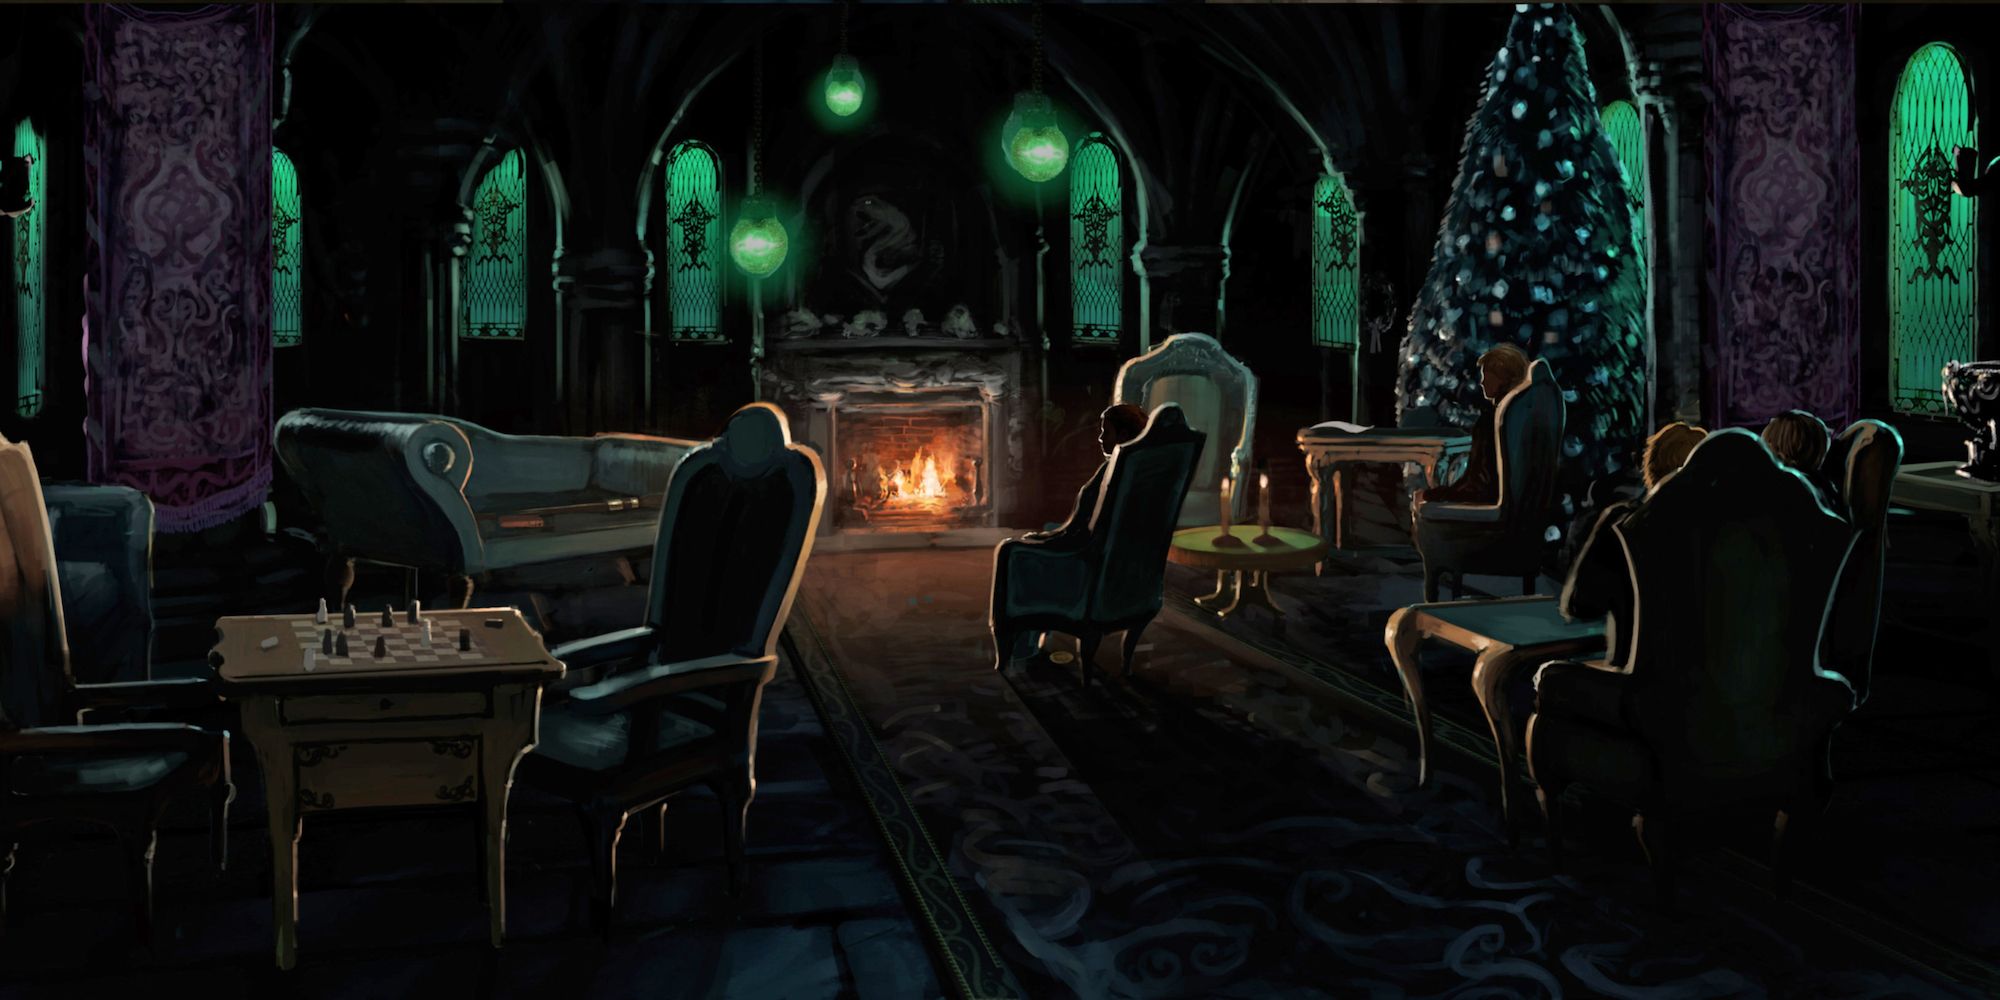 What is the role of the portraits in the Slytherin common room?